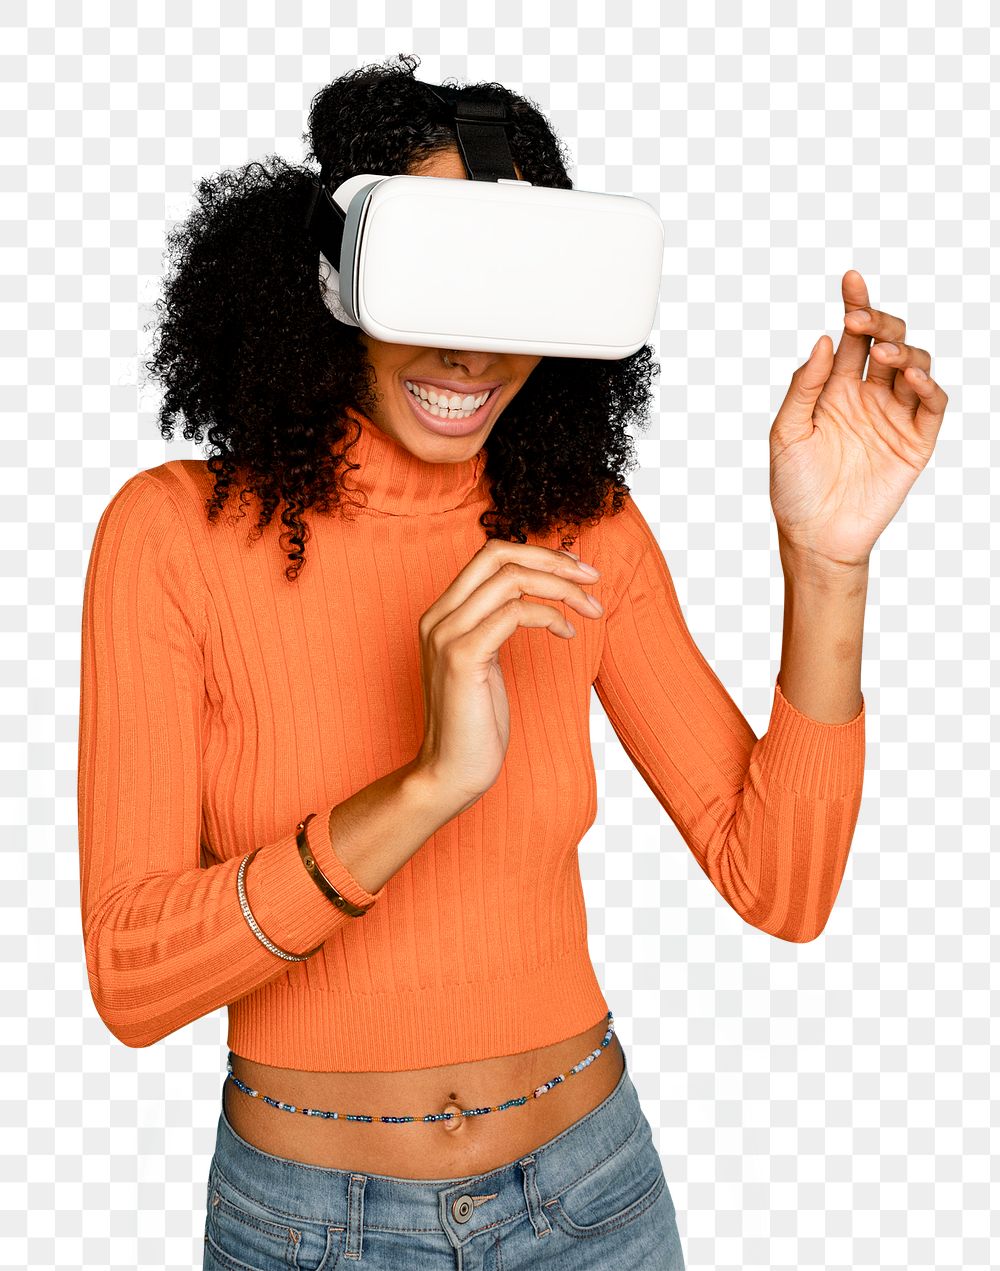 Smiling woman mockup png having fun with VR headset digital device